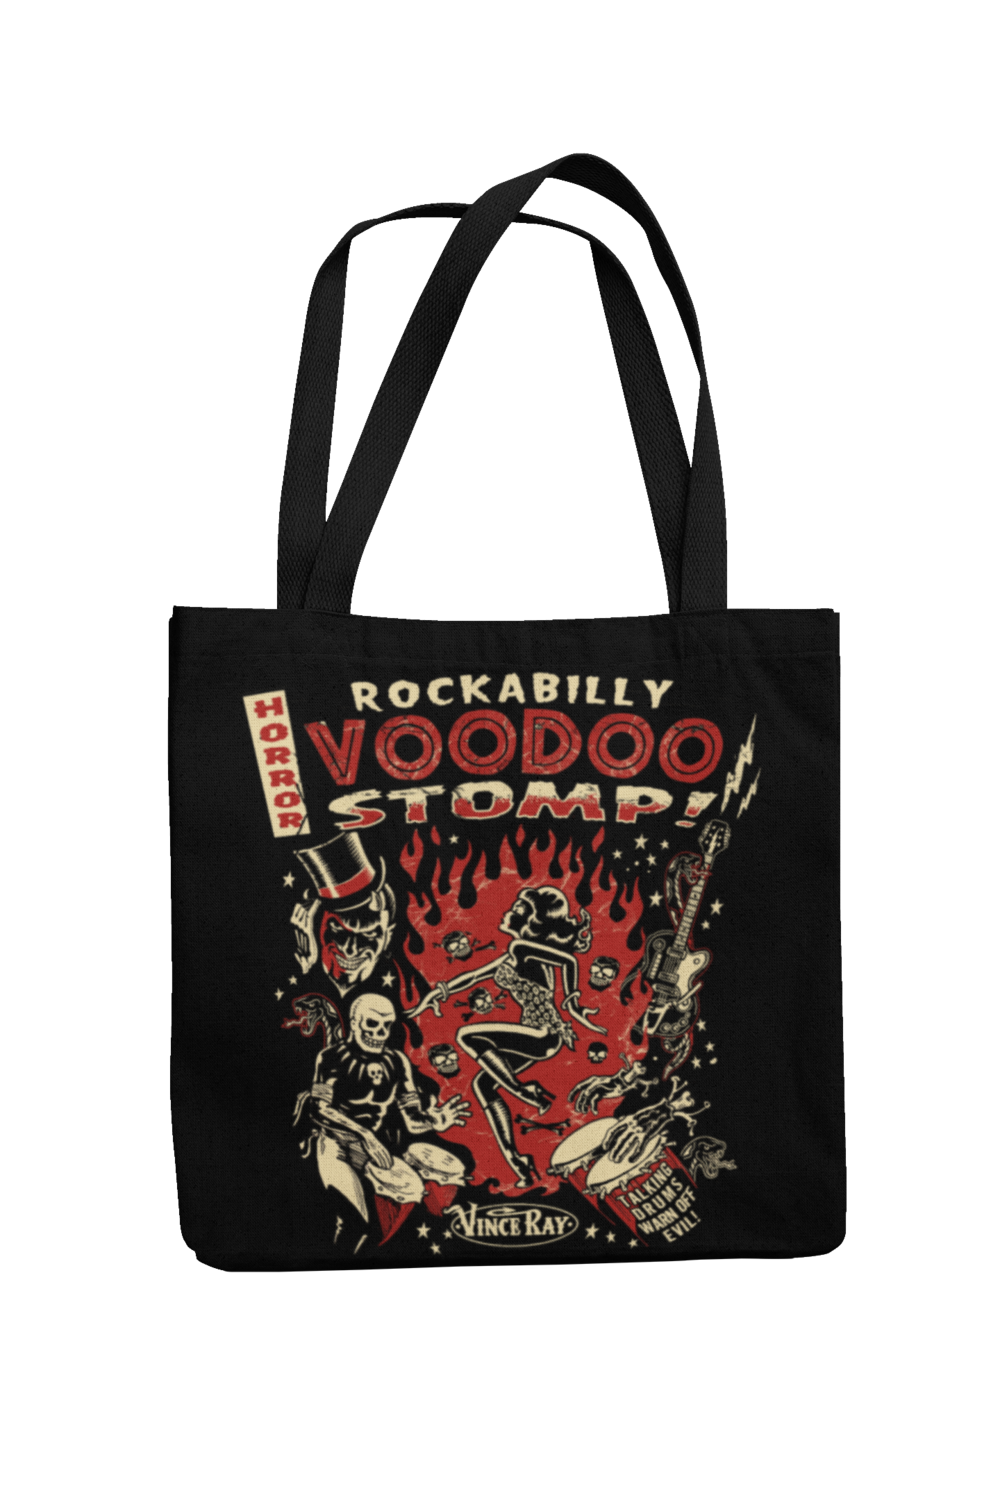 Cotton Bag Rockabilly Voodoo Stomp design by VINCE RAY